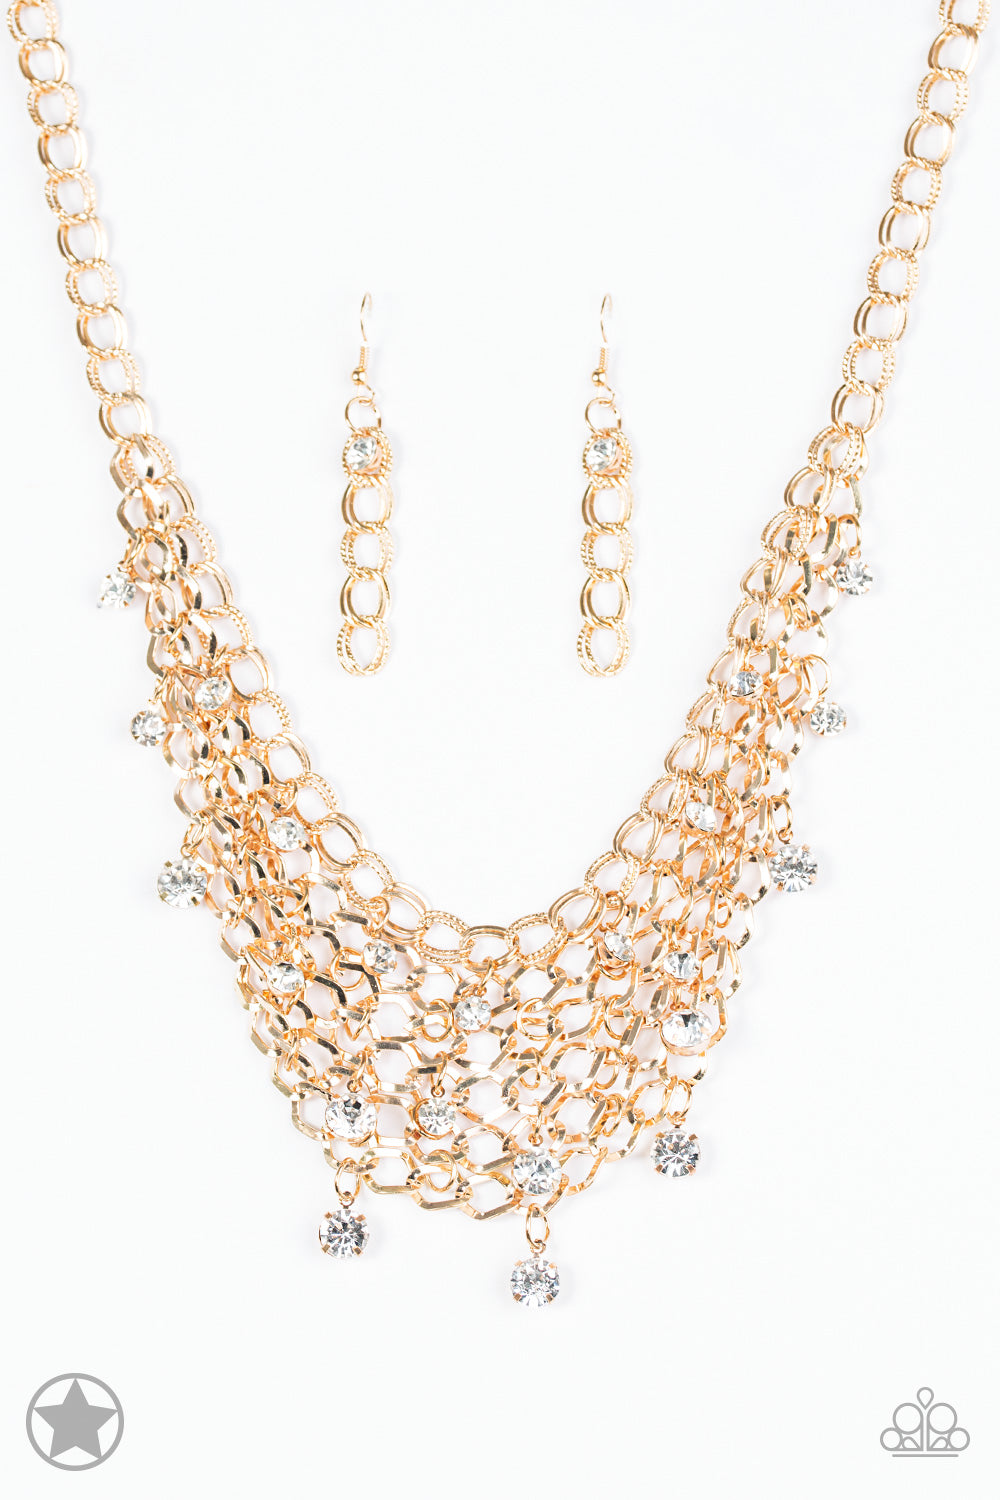 Paparazzi Accessories Fishing For Compliments - Gold Blockbuster Necklaces - Lady T Accessories